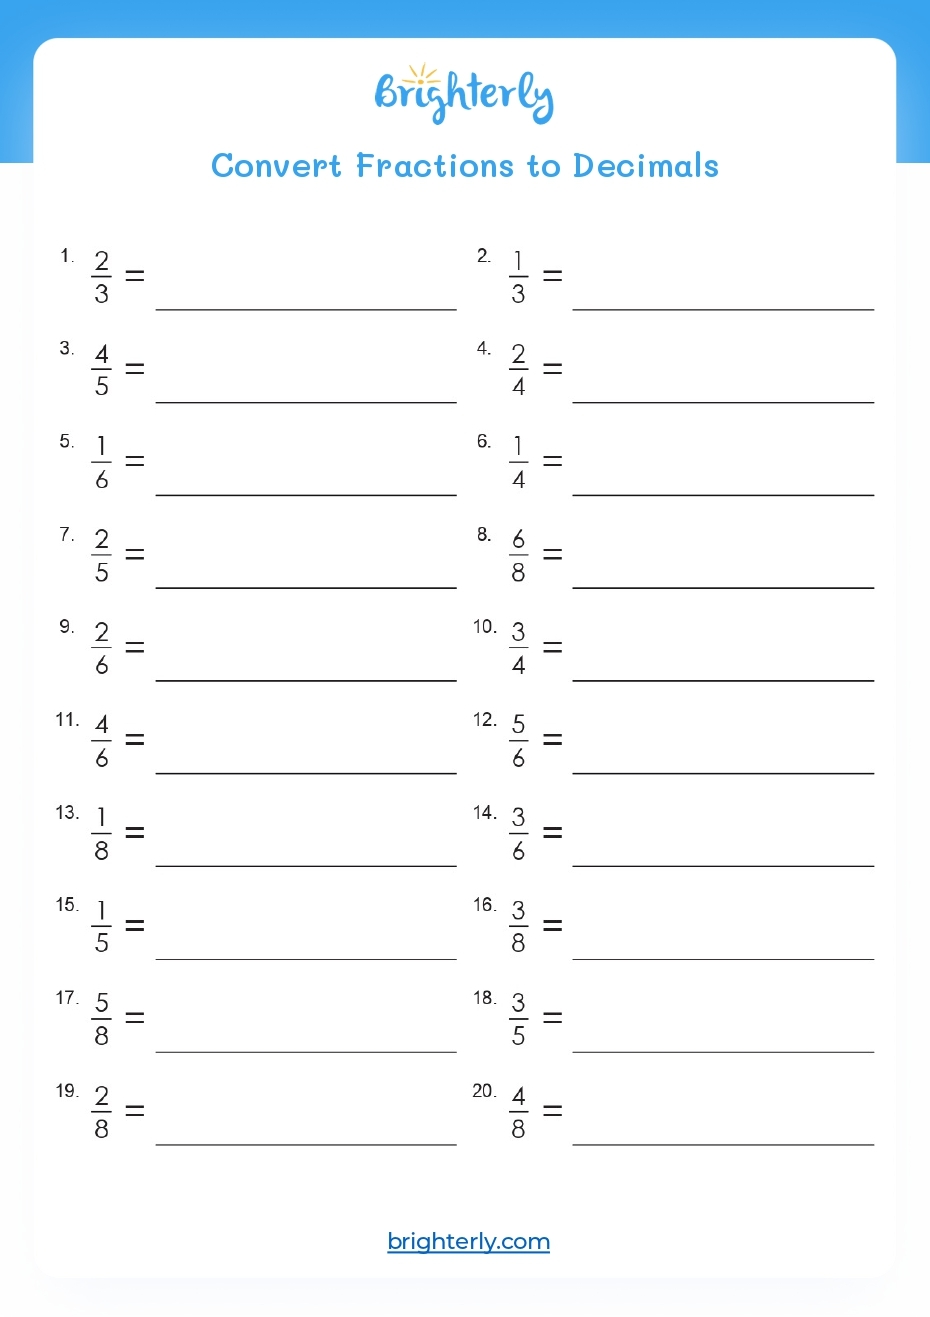 free-printable-fractions-to-decimals-worksheets-pdf-brighterly-math-worksheet-answers